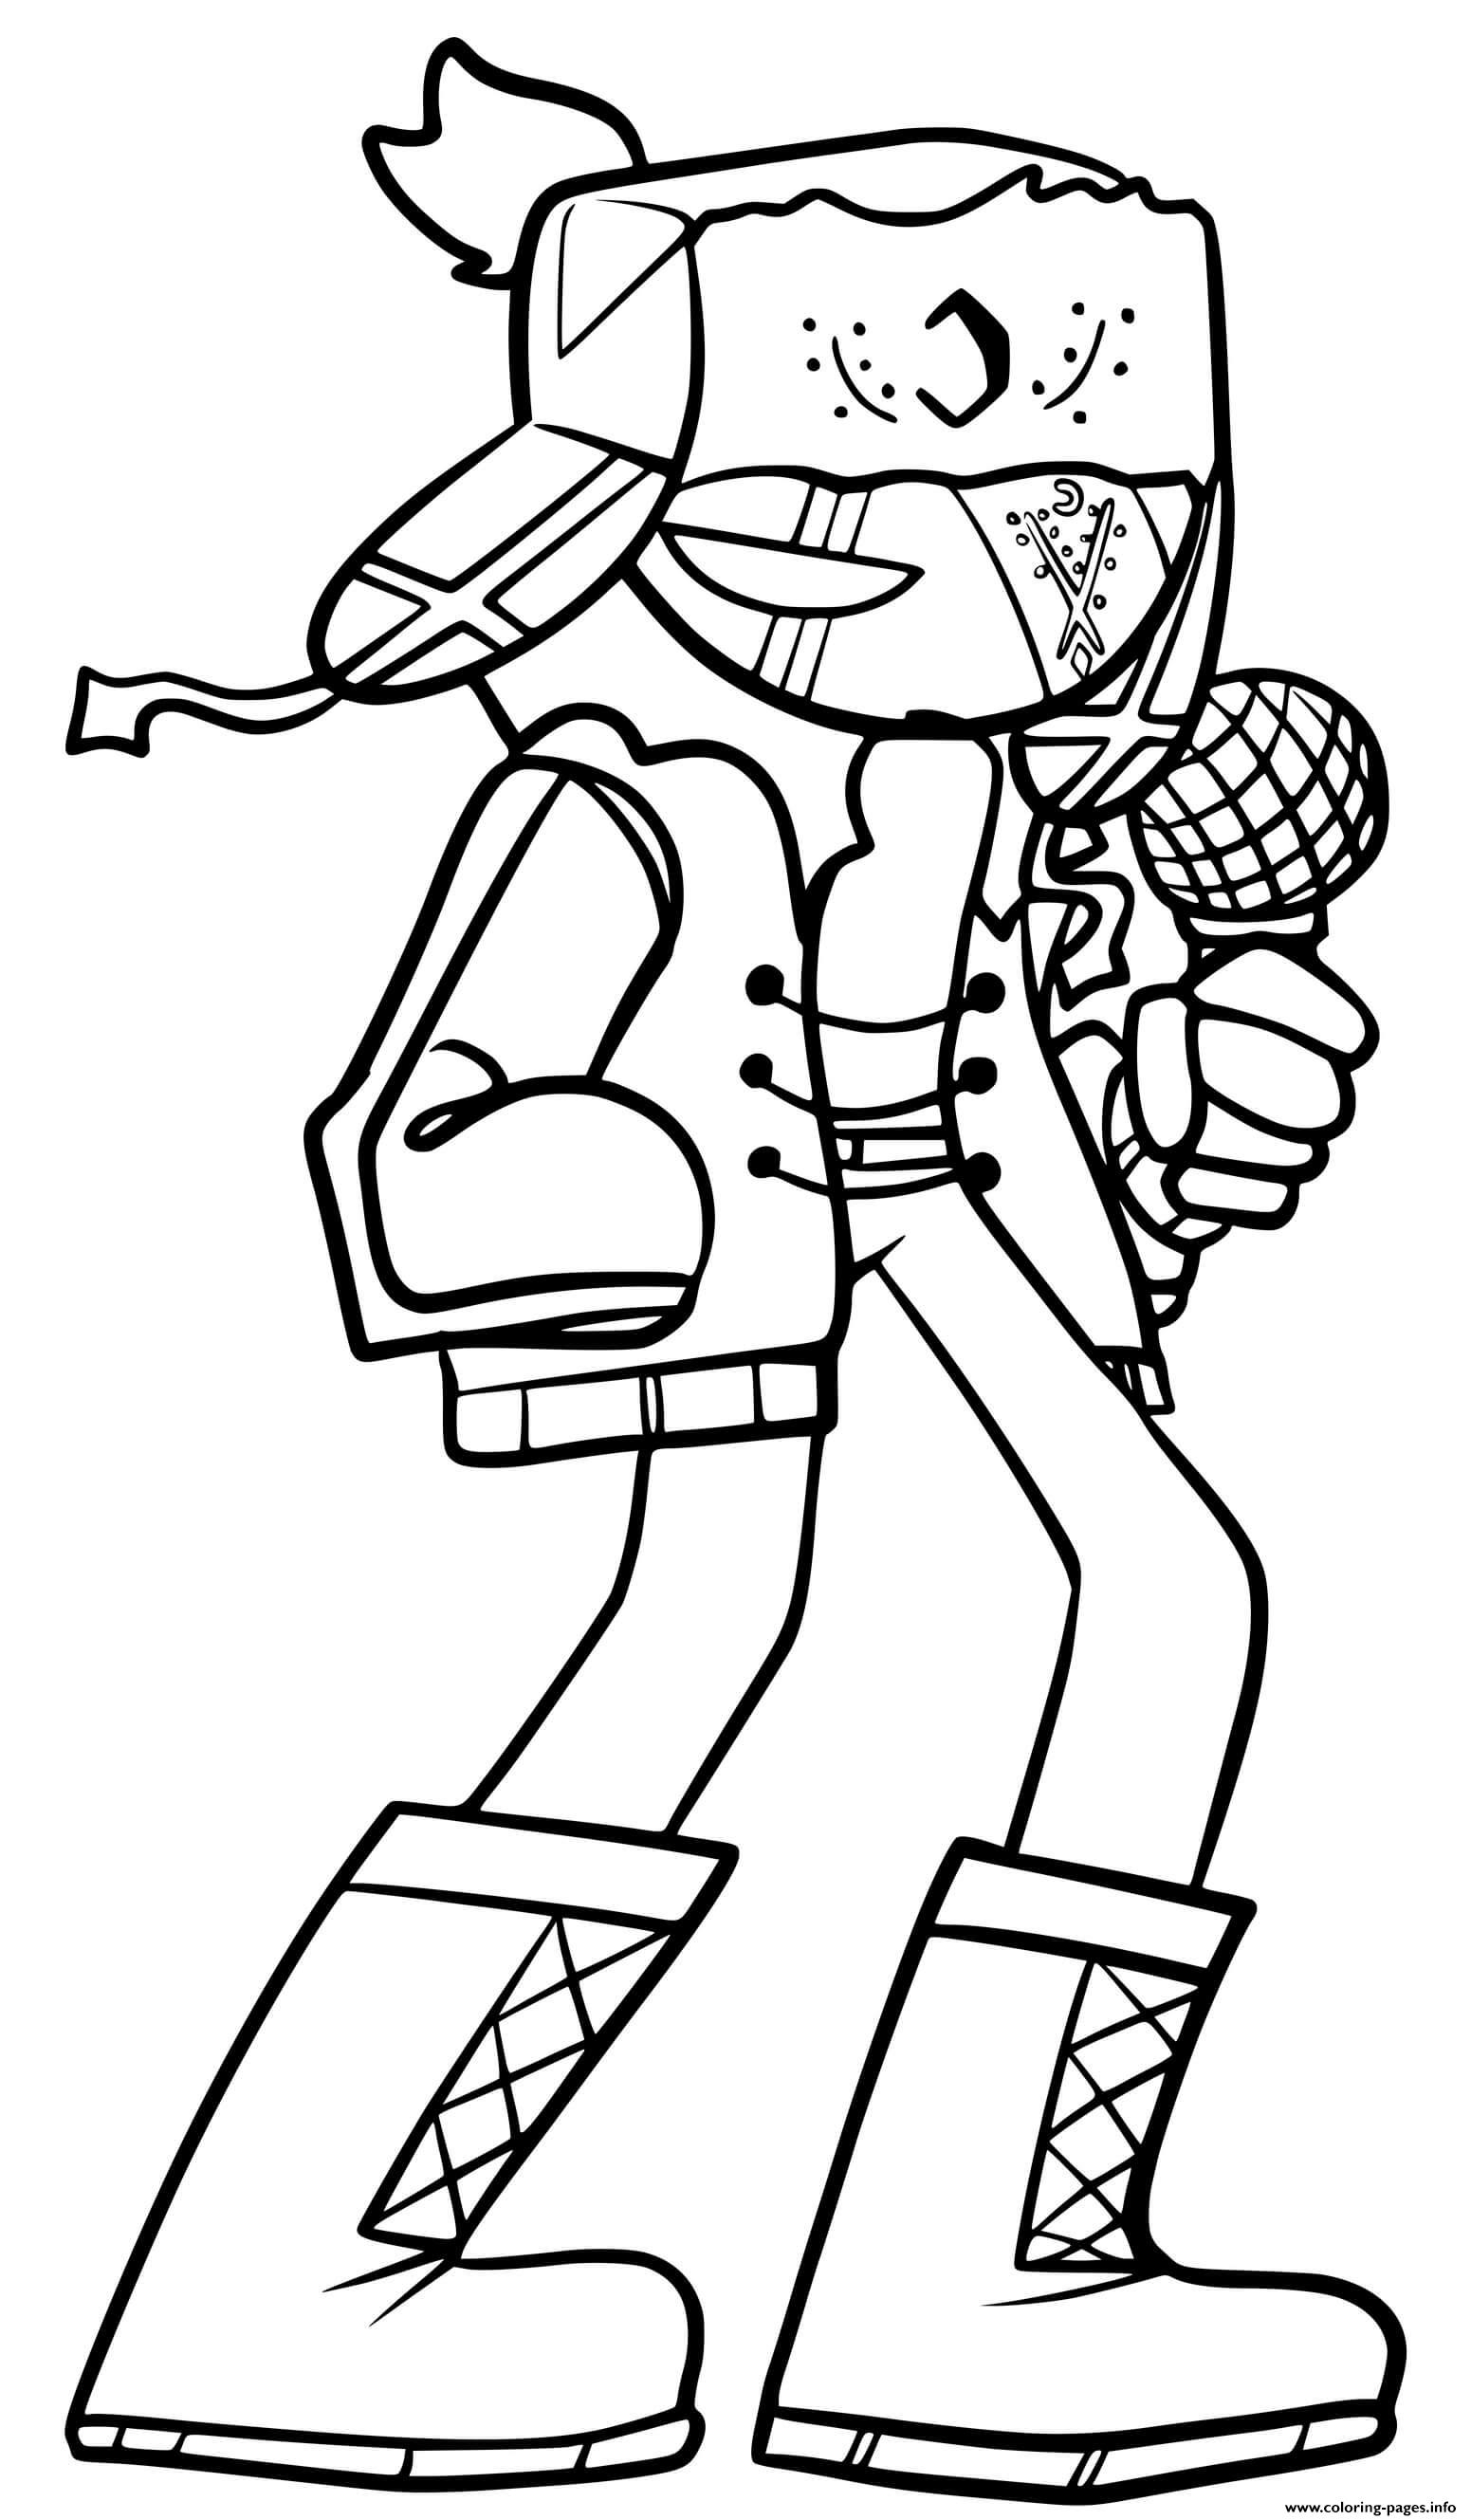 Ruv Friday Night Funkin Coloring Page Printable